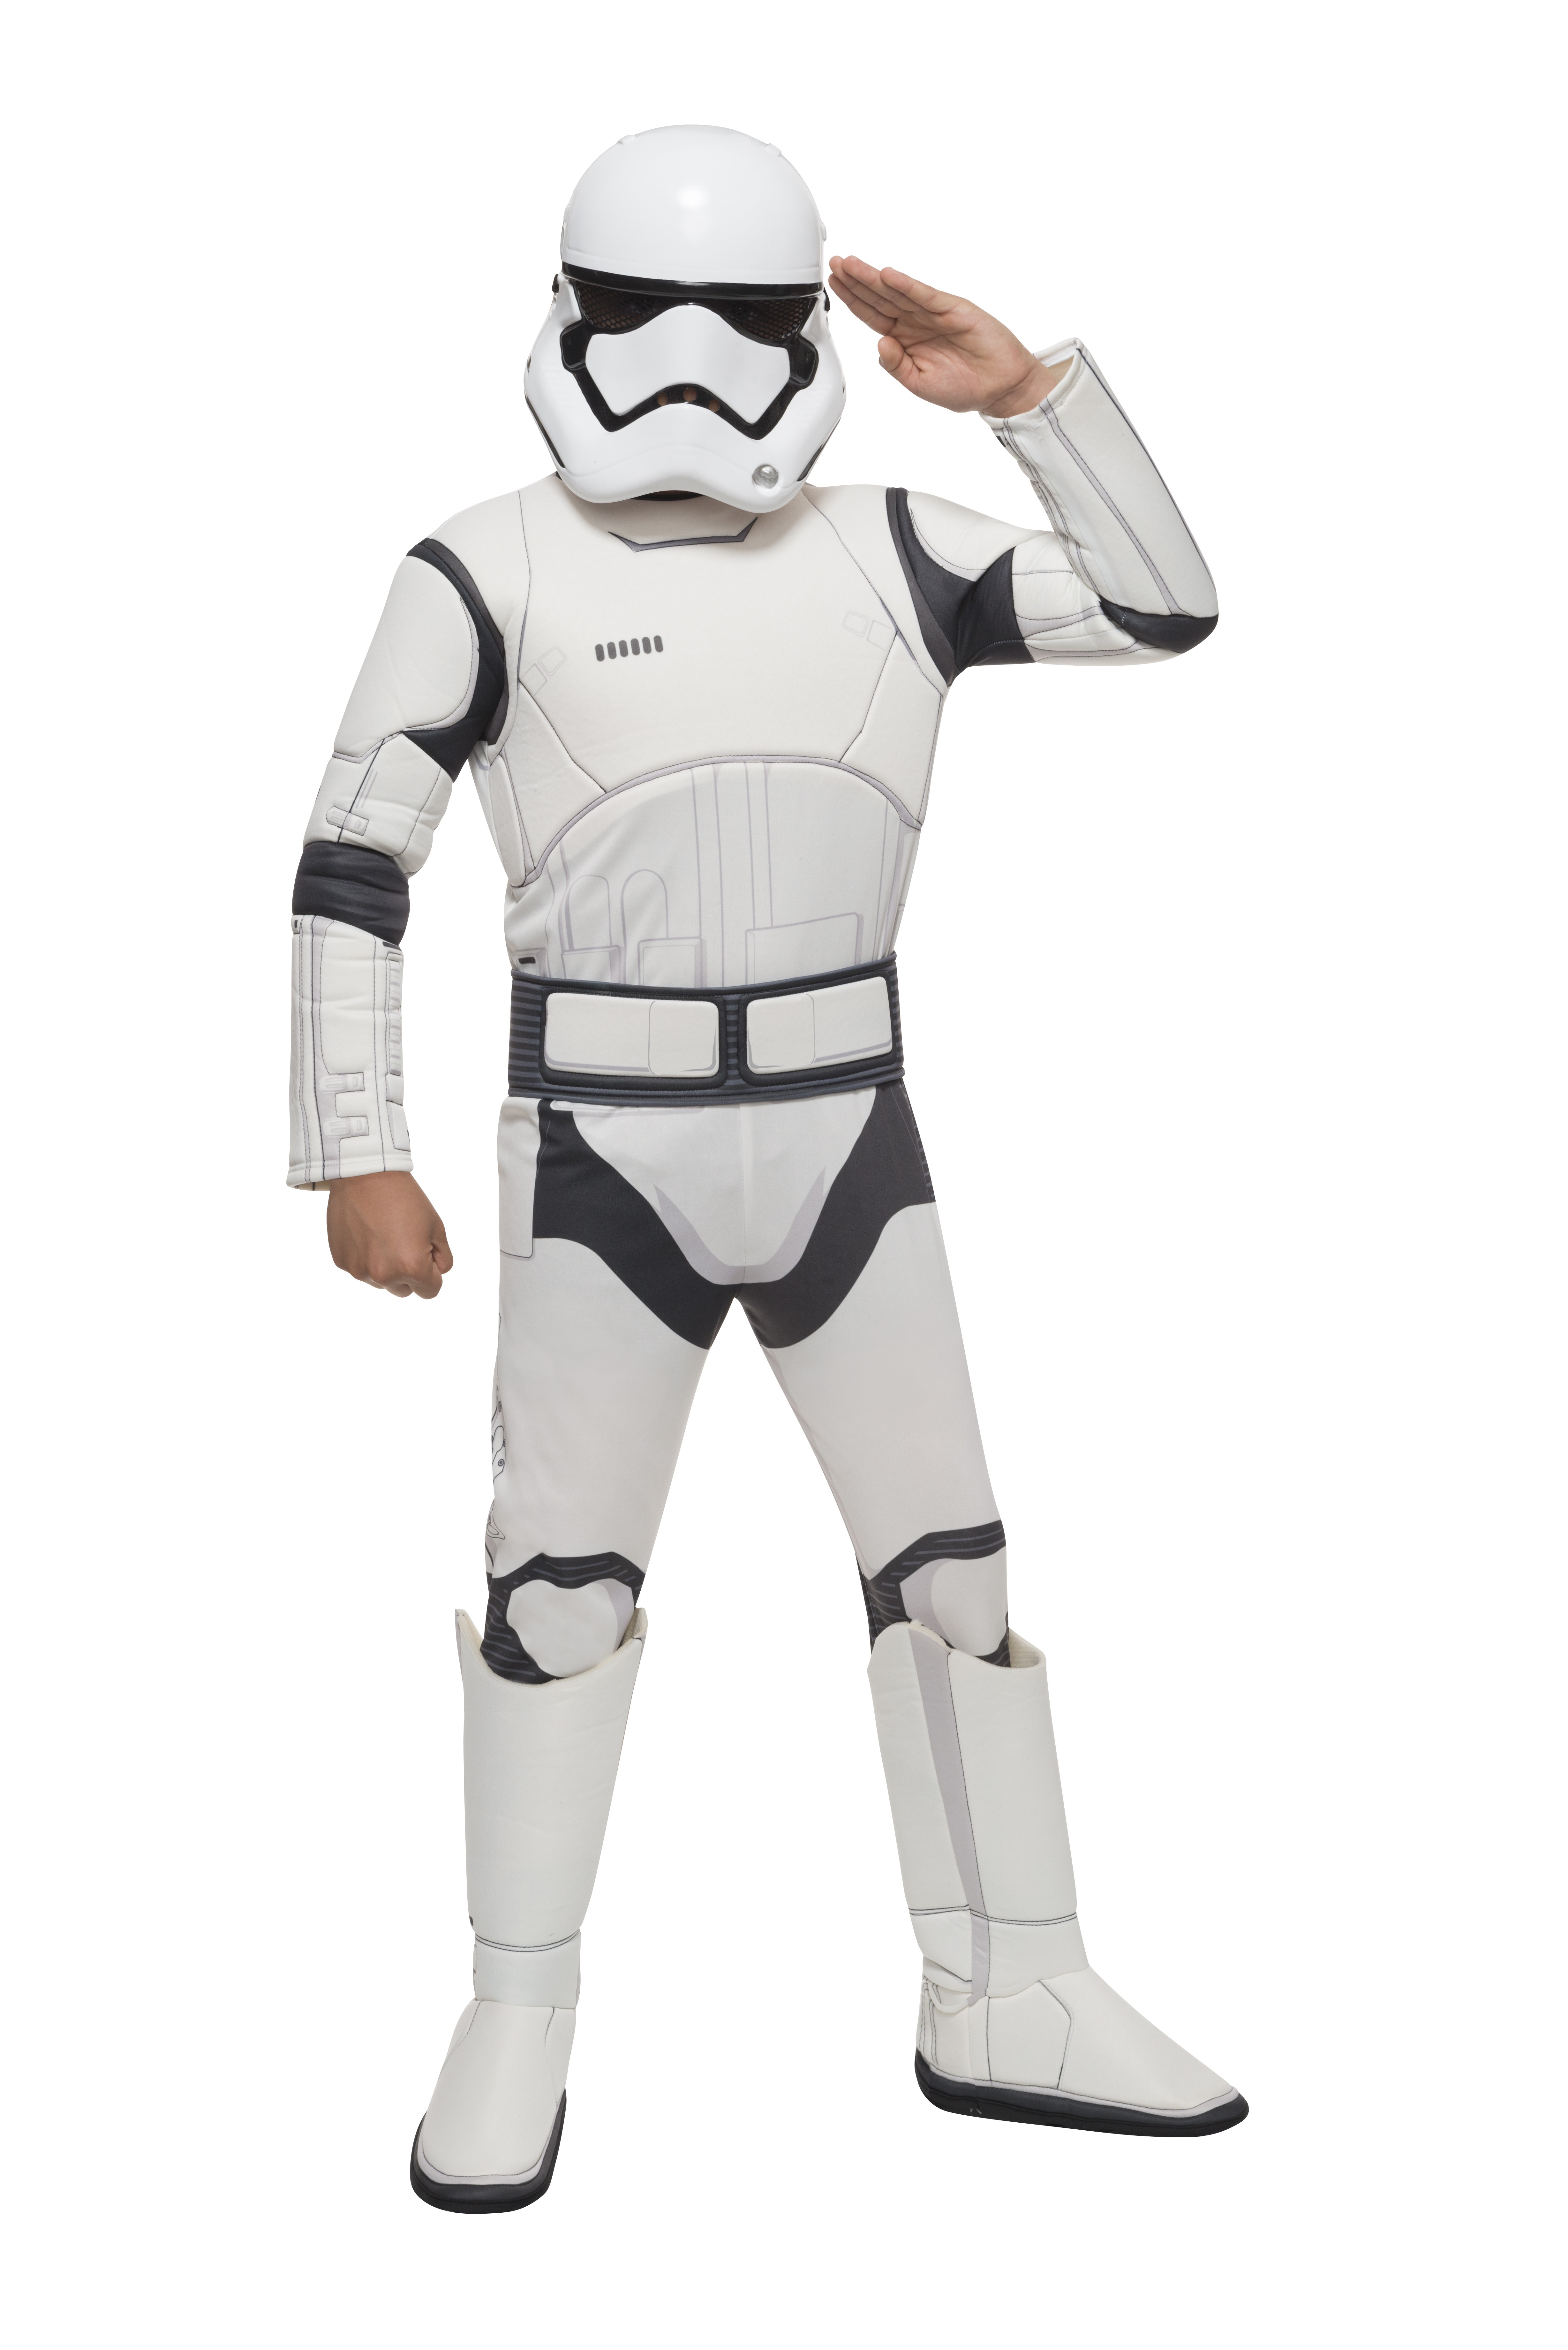 Star Wars Force Awakens Stormtrooper Child Deluxe Costume Size S,M,L - Click Image to Close